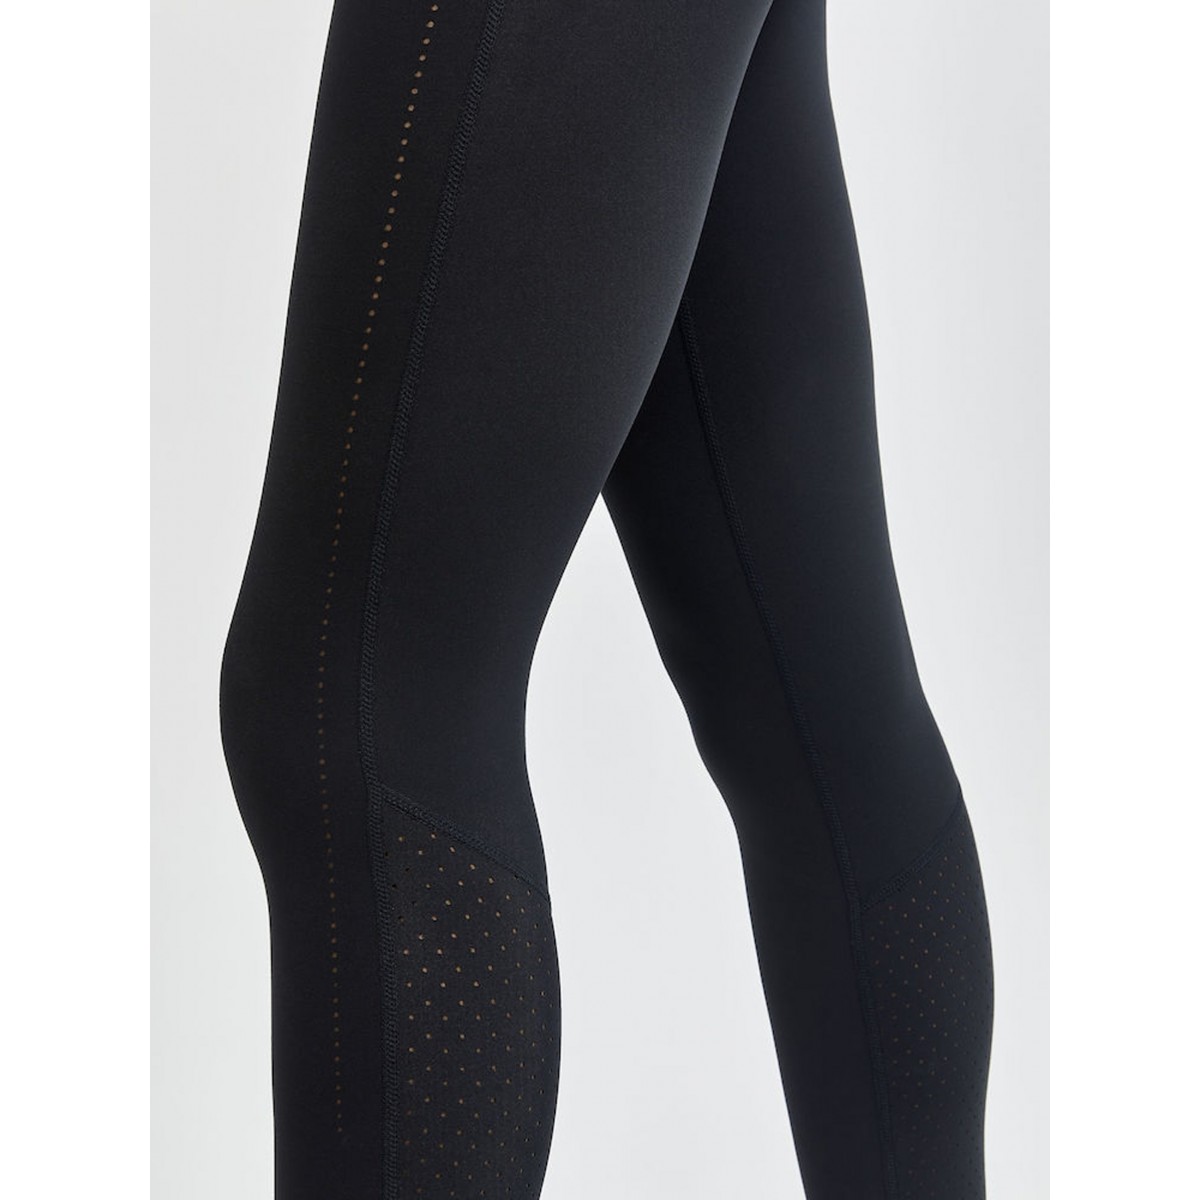 Craft Charge Perforated Tights Black